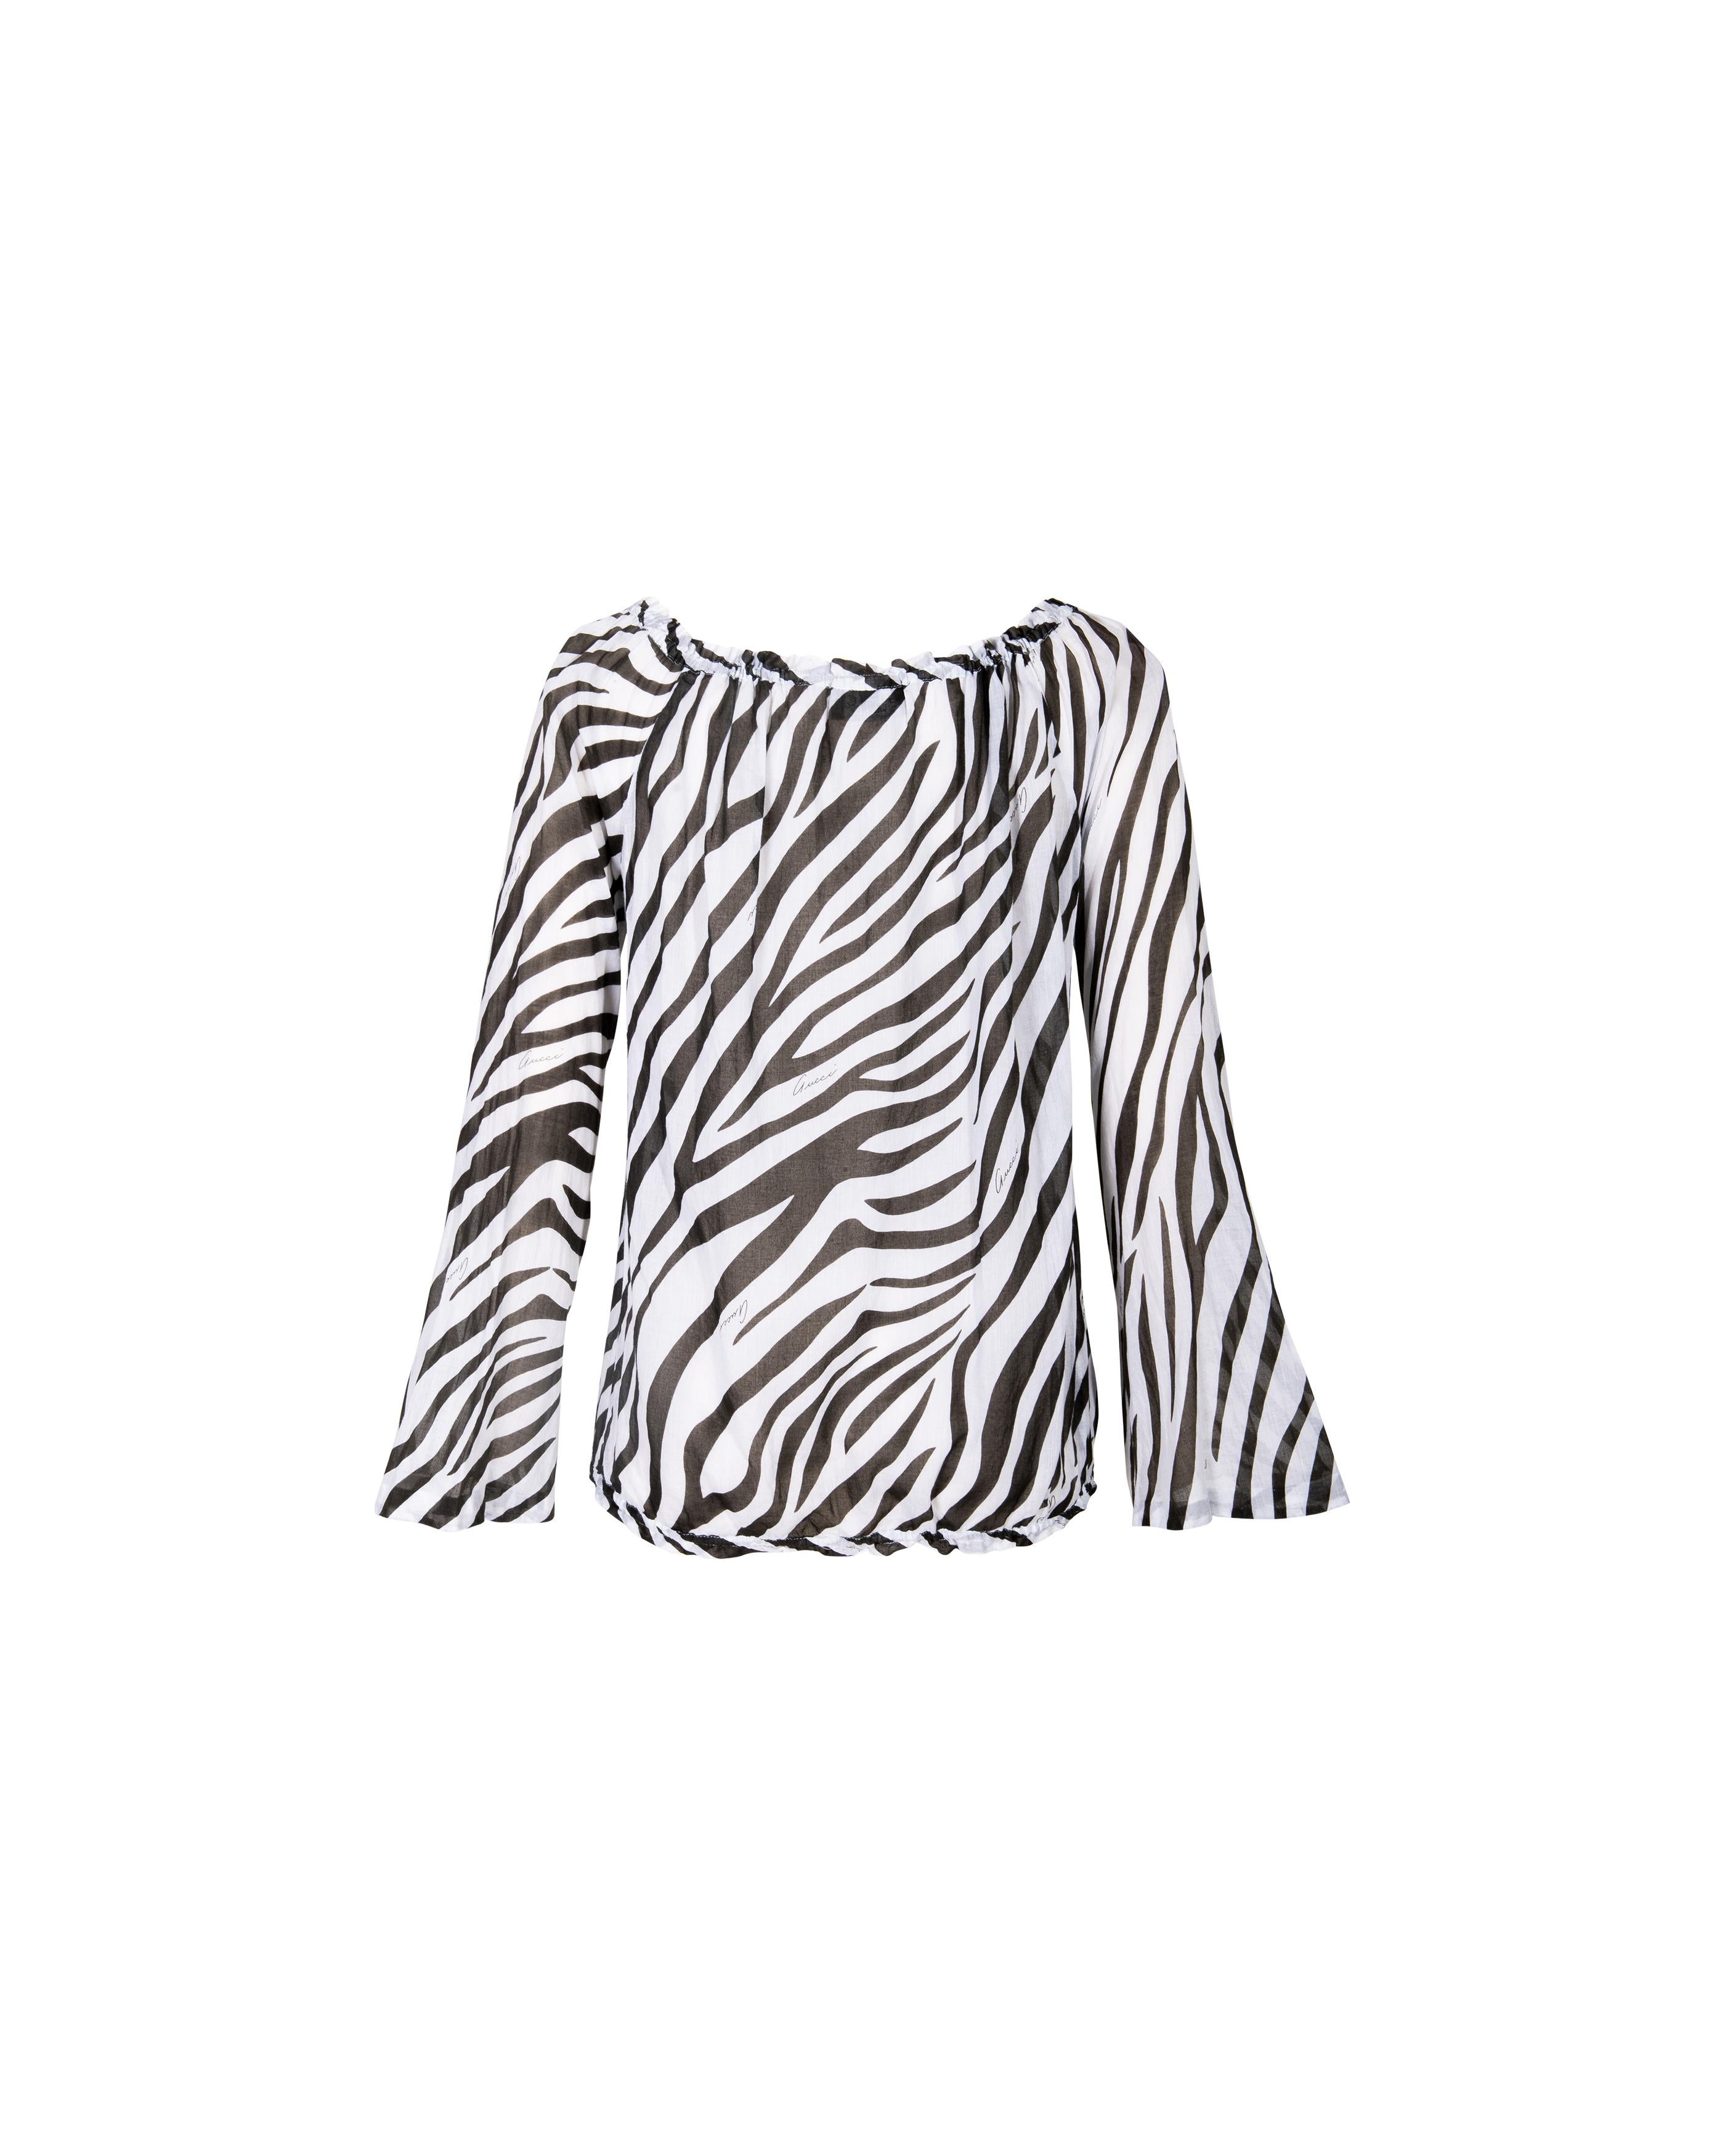 S/S 1996 Gucci by Tom Ford Black and White Zebra Print Cotton Blouse 1